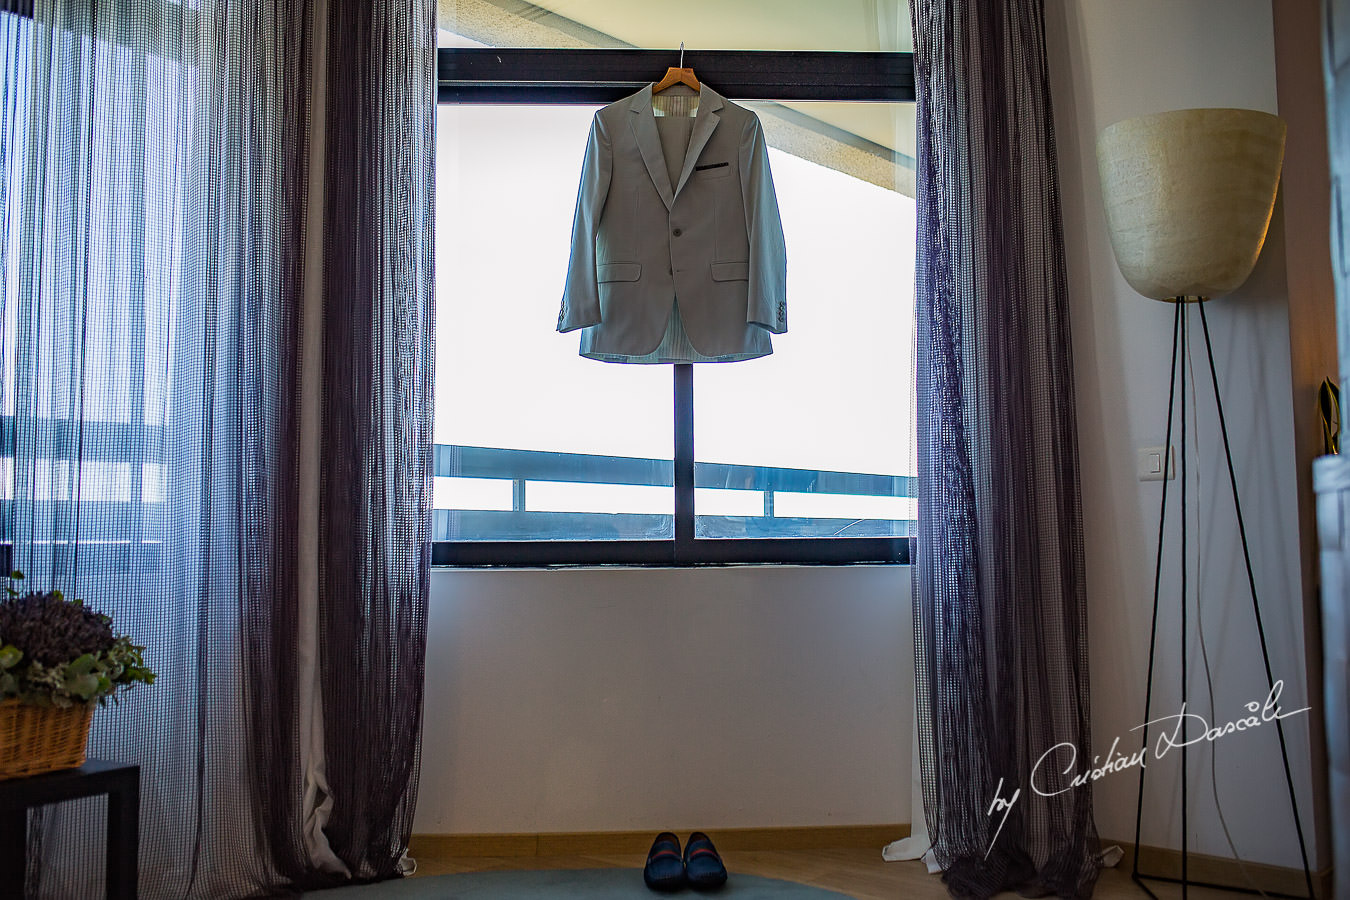 Groom's details captured during a wedding photography at the Lighthouse Limassol, by Cyprus Photographer Cristian Dascalu.